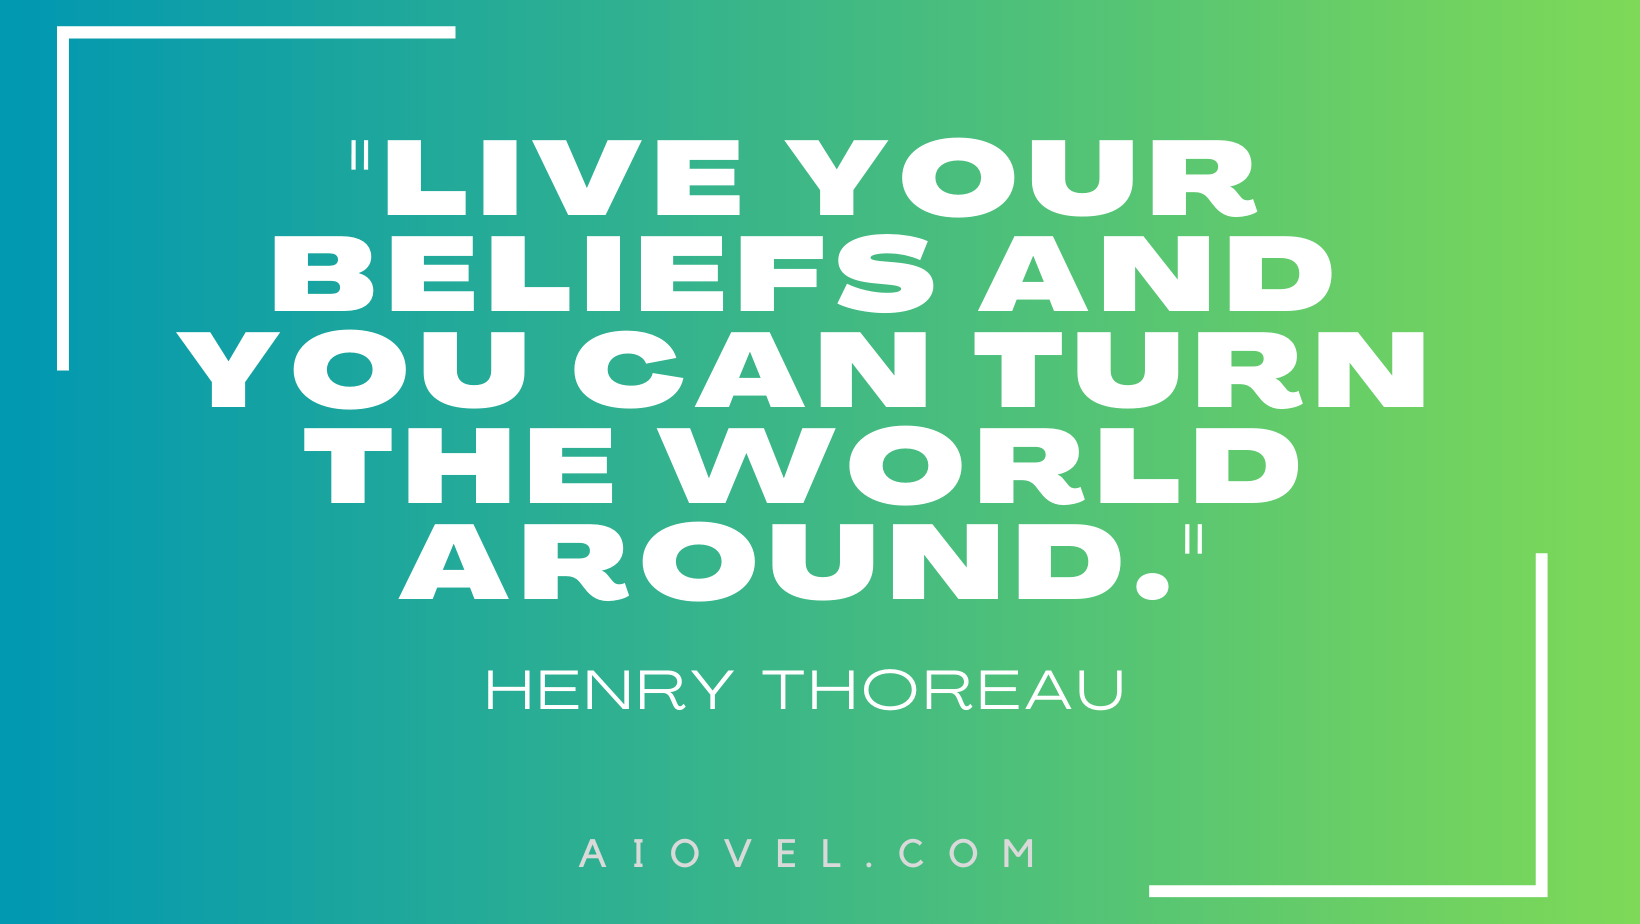 "Live your beliefs and you can turn the world around." - Henry David Thoreau 🌿